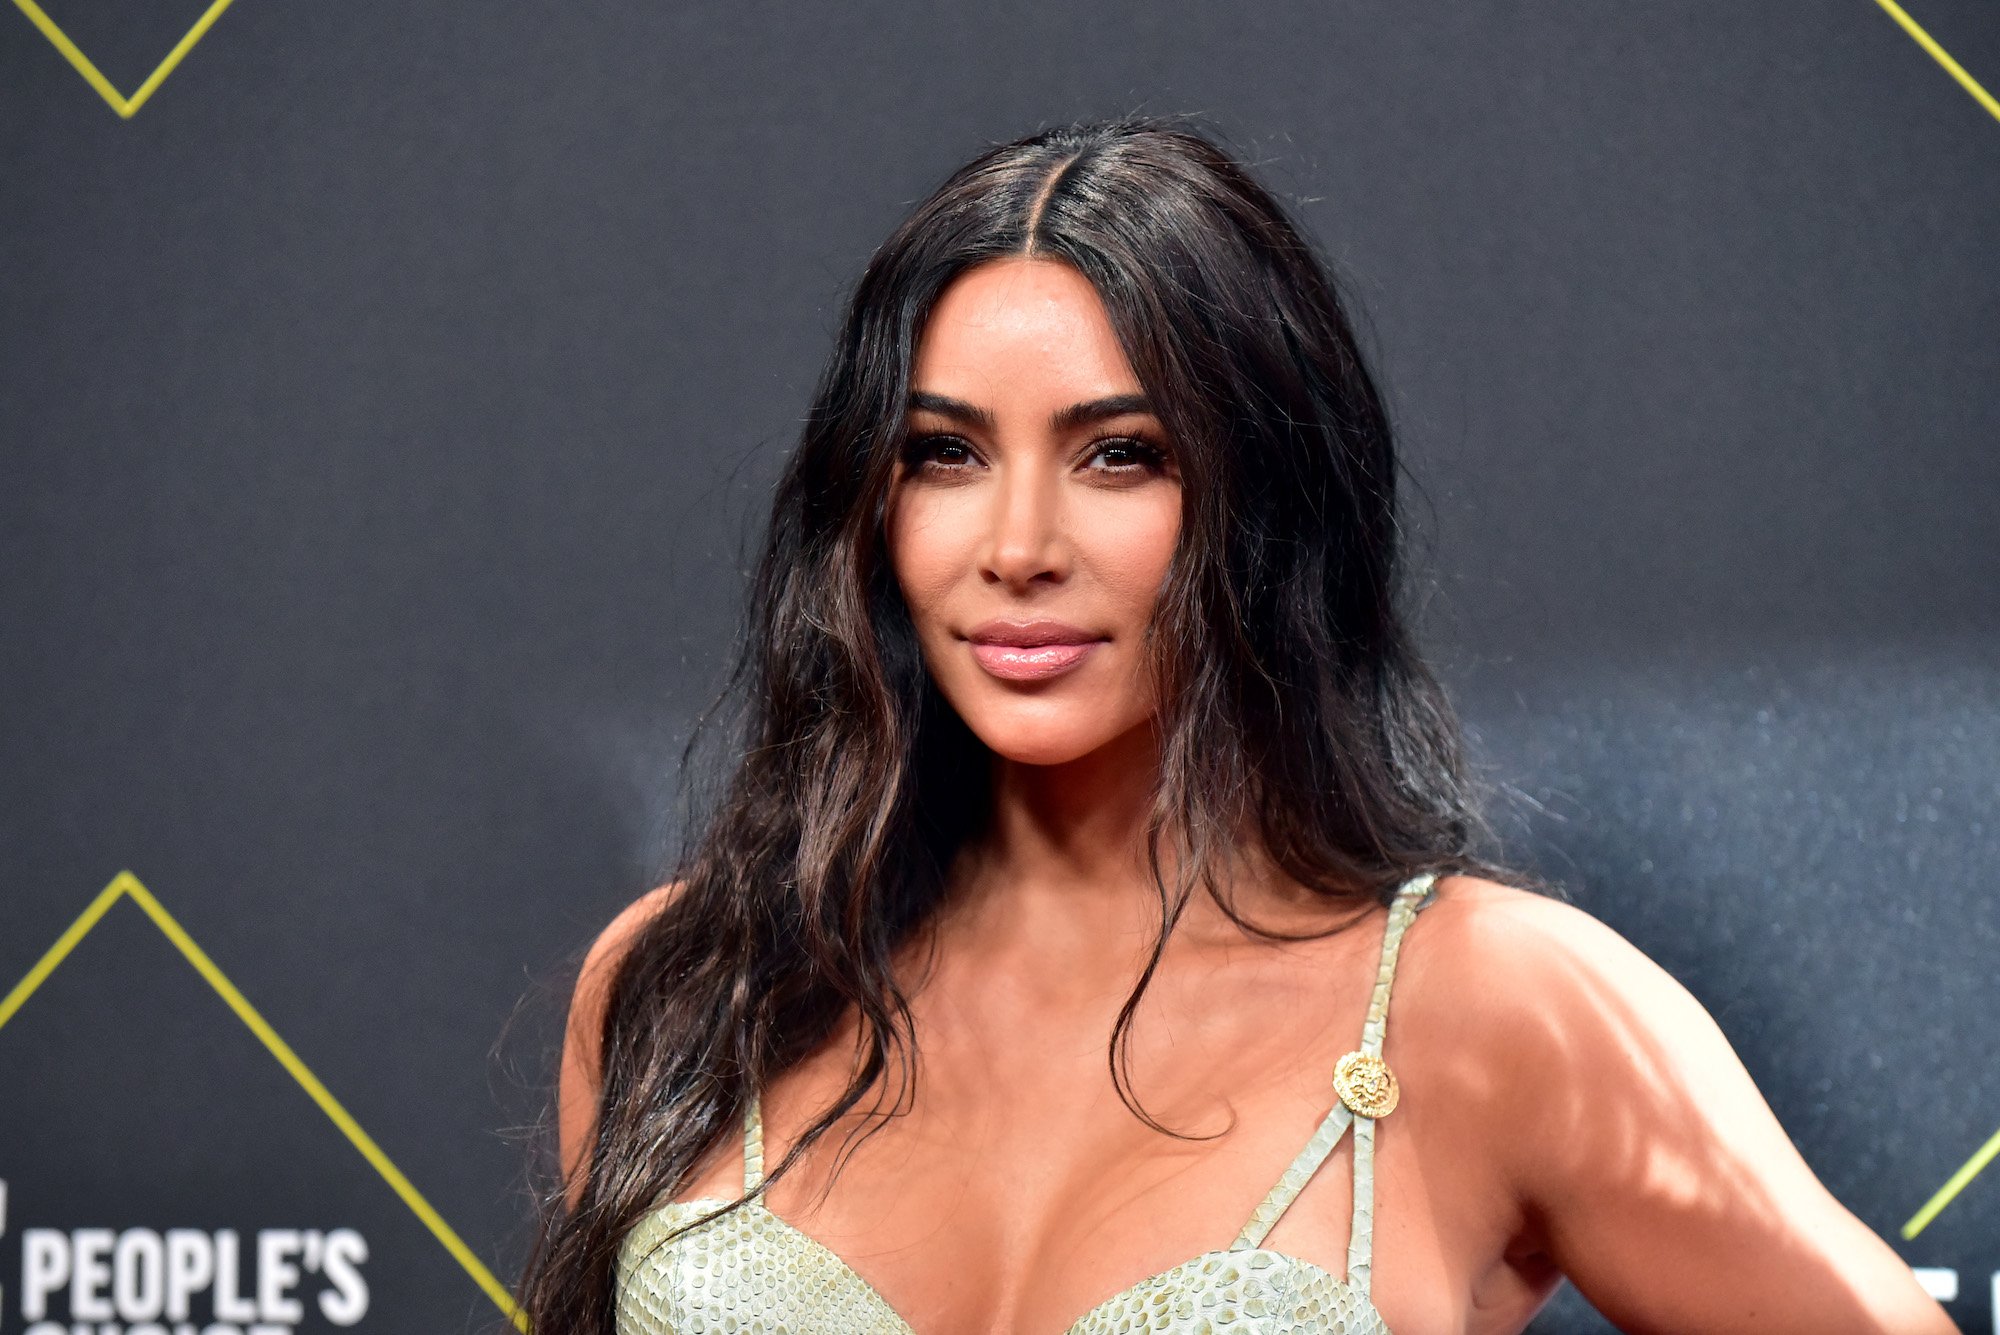 Kim Kardashian fans are skeptical about his $ 500,000 offer